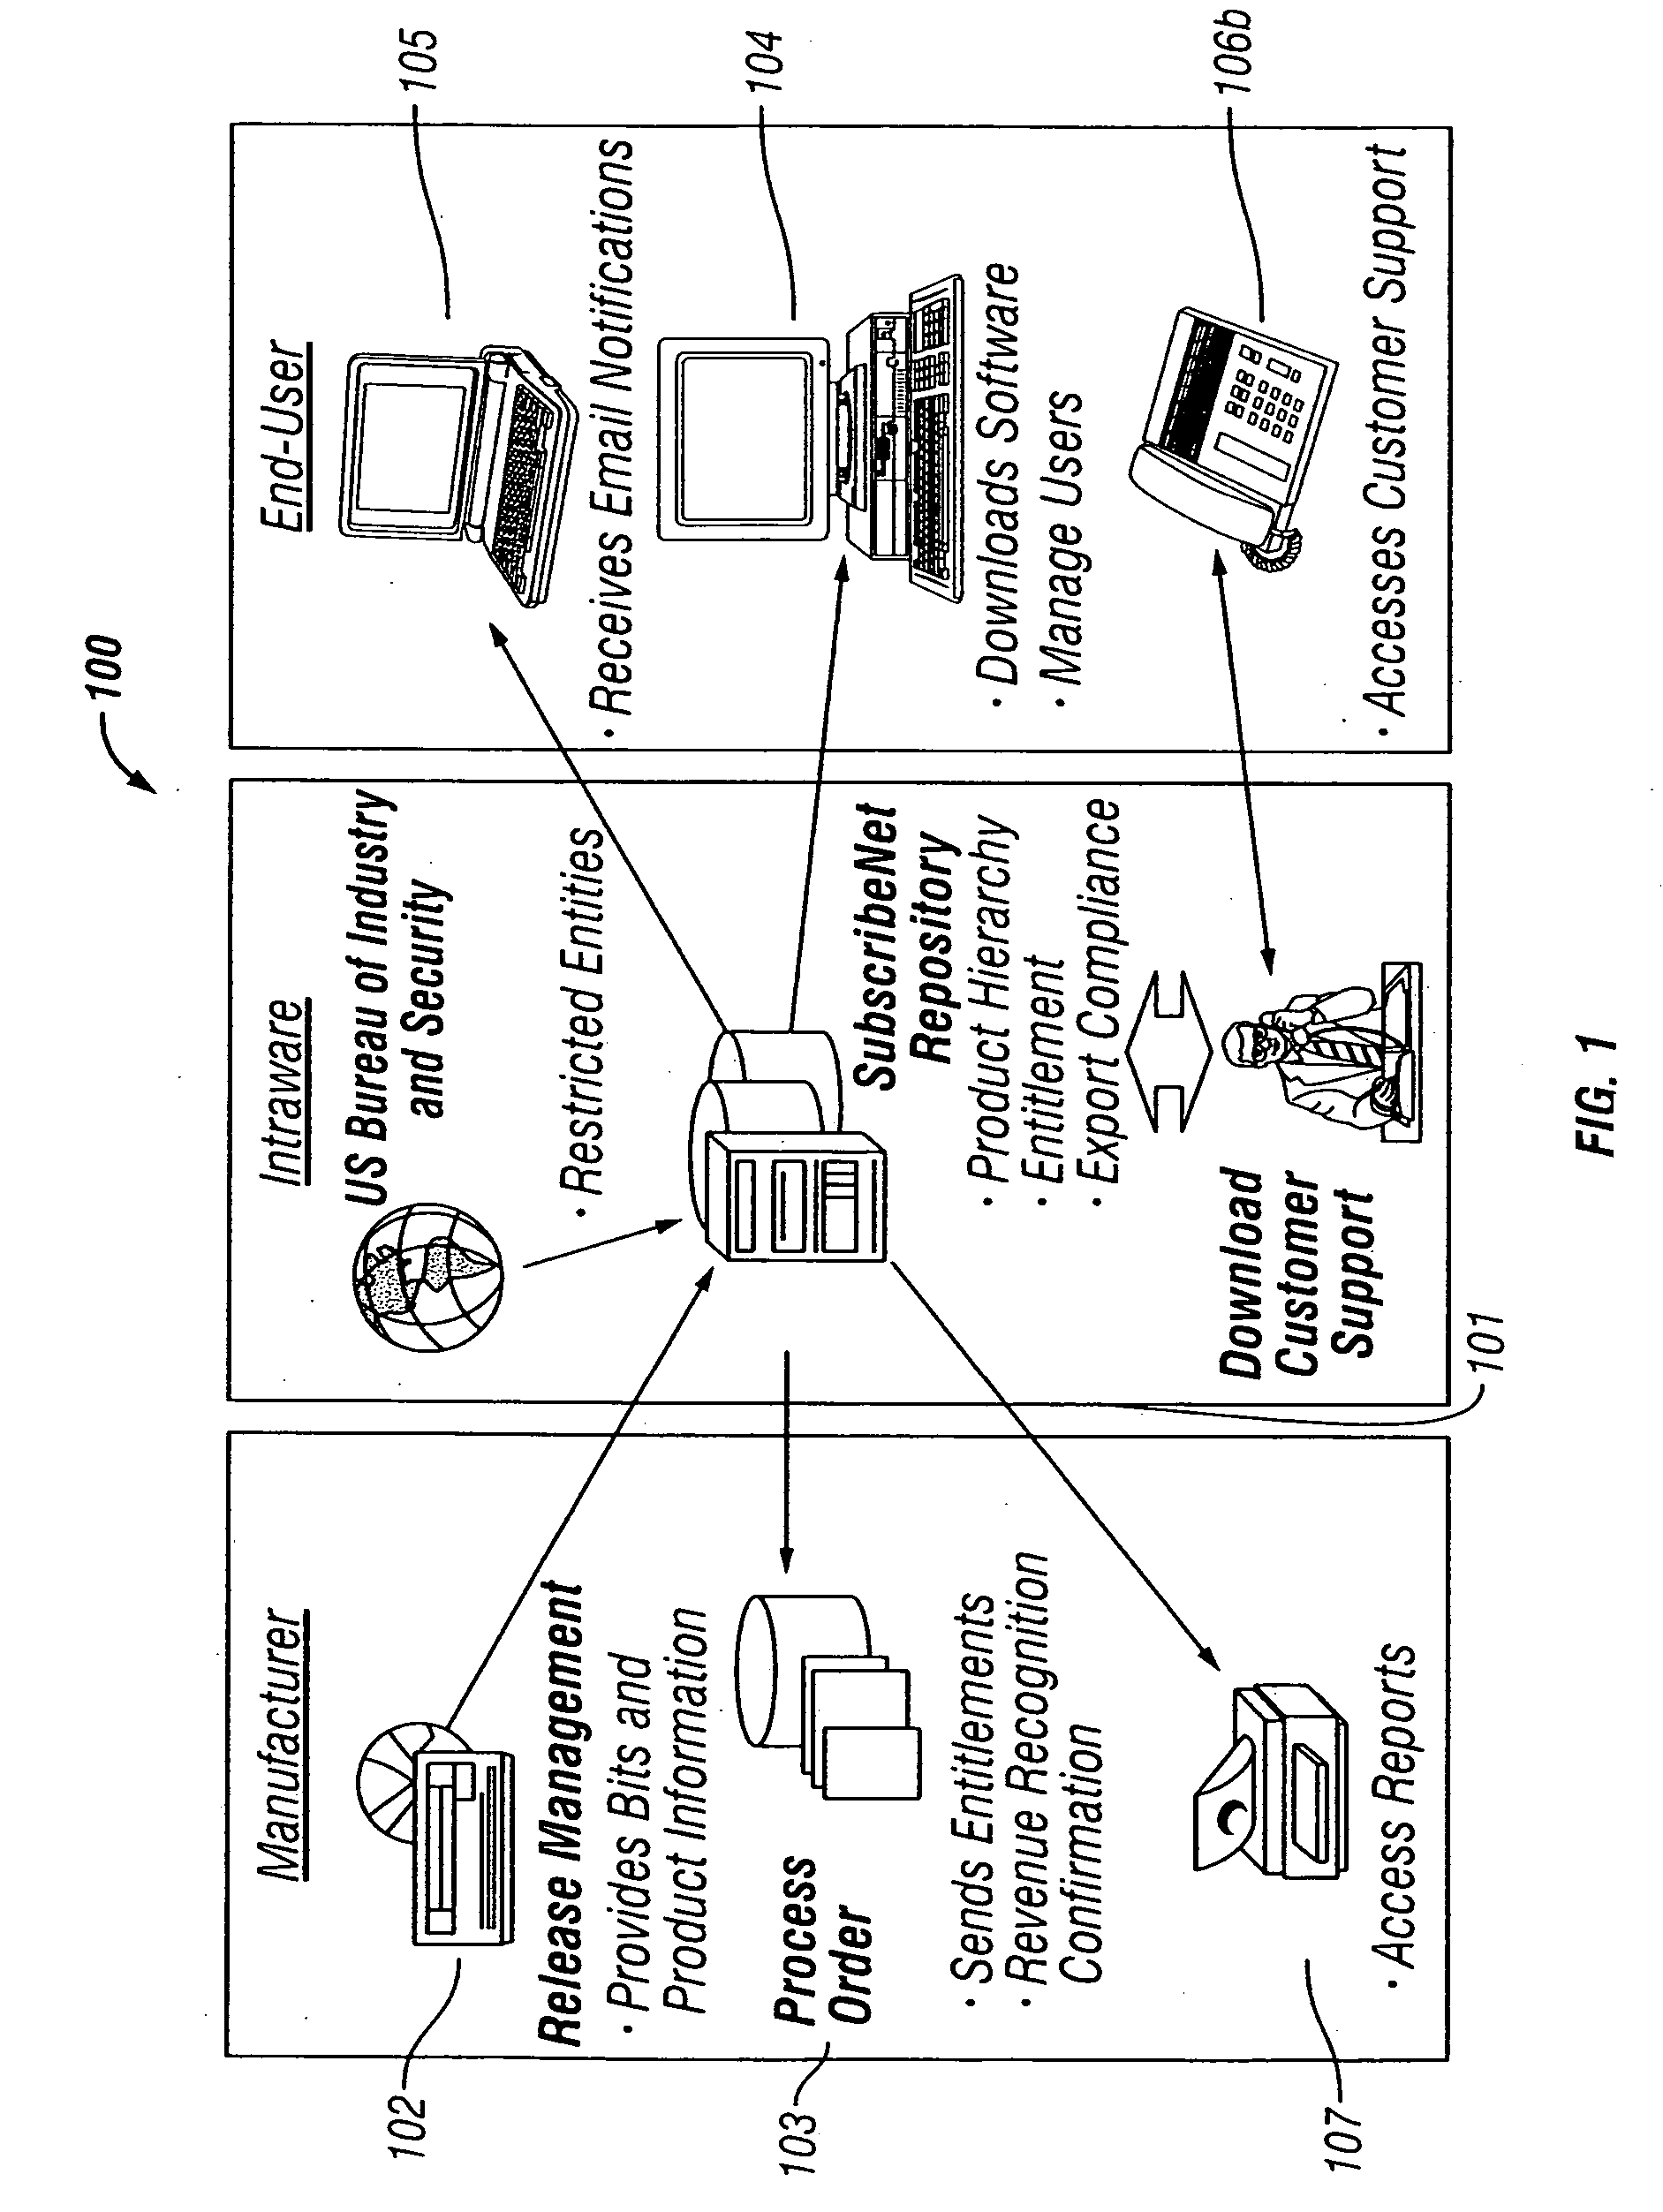 Method and system for managing digital goods